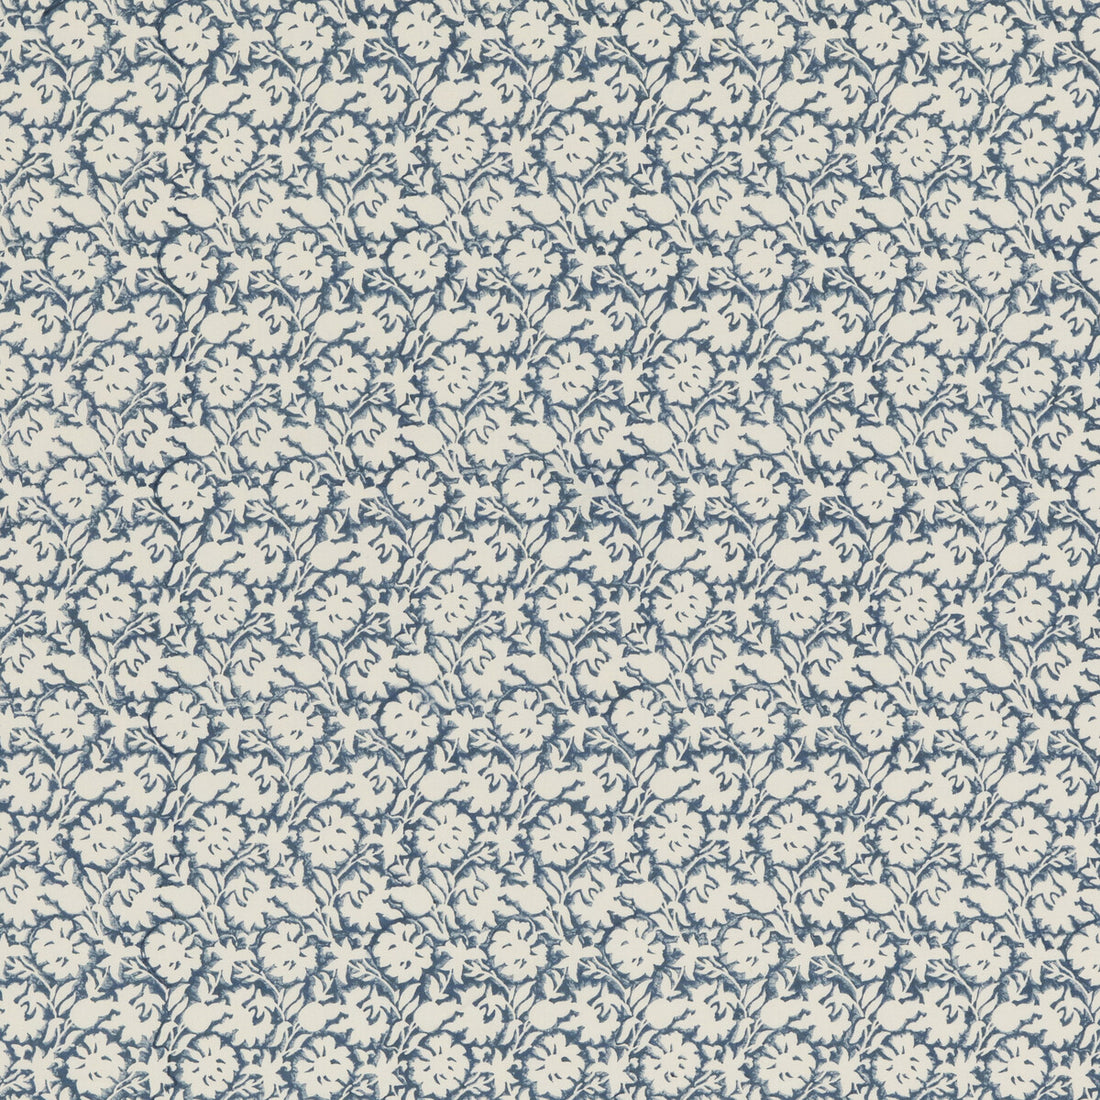 Flower Press fabric in indigo color - pattern PP50480.1.0 - by Baker Lifestyle in the Block Party collection